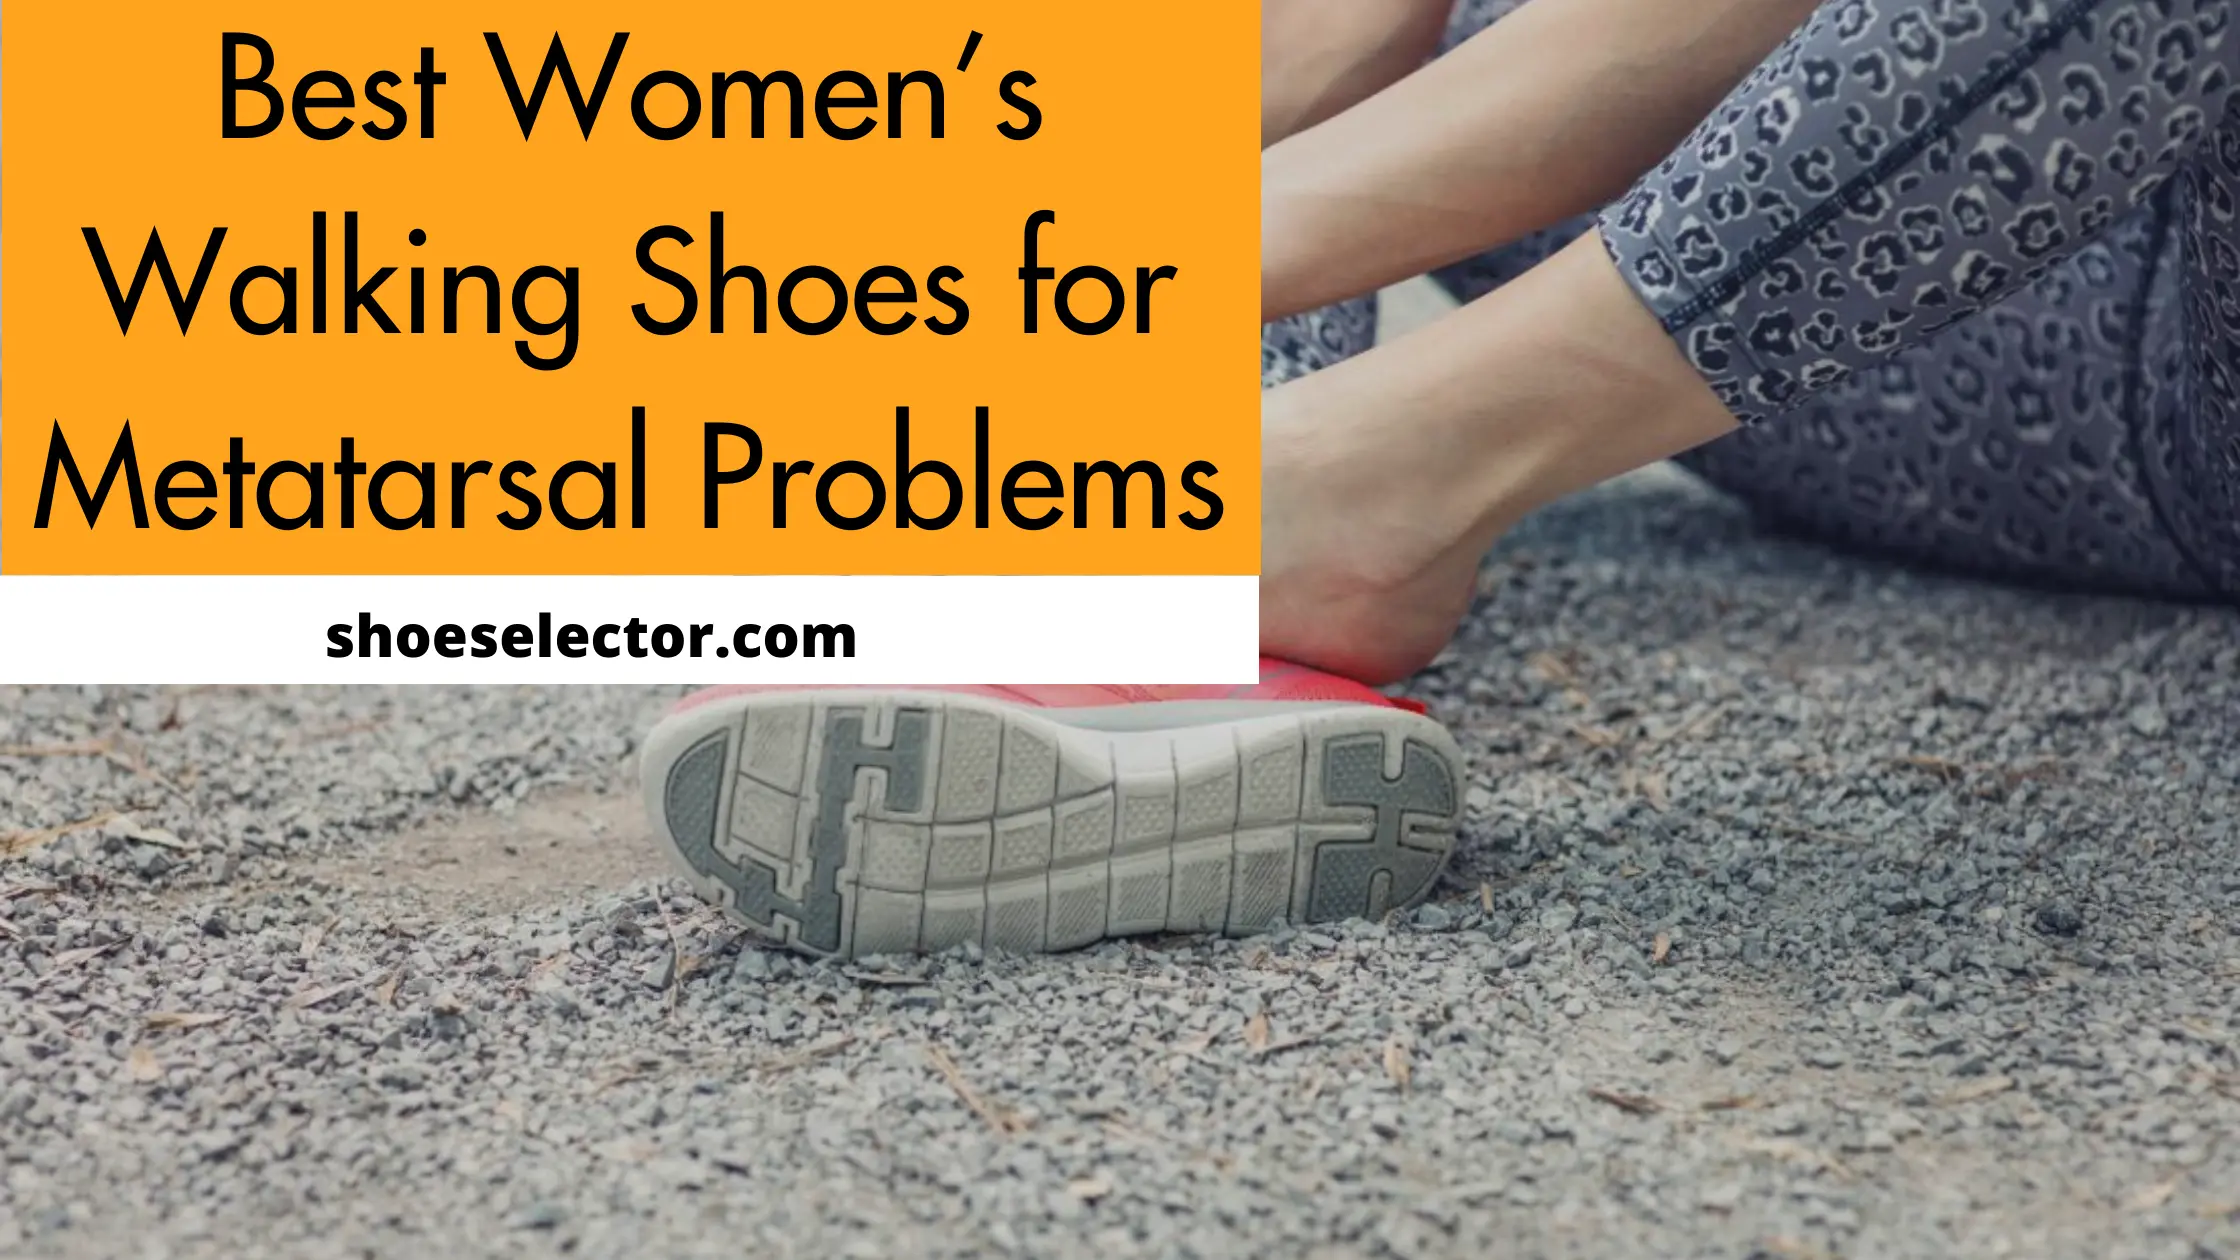 Best Women's Walking Shoes For Metatarsal Problems With Tips